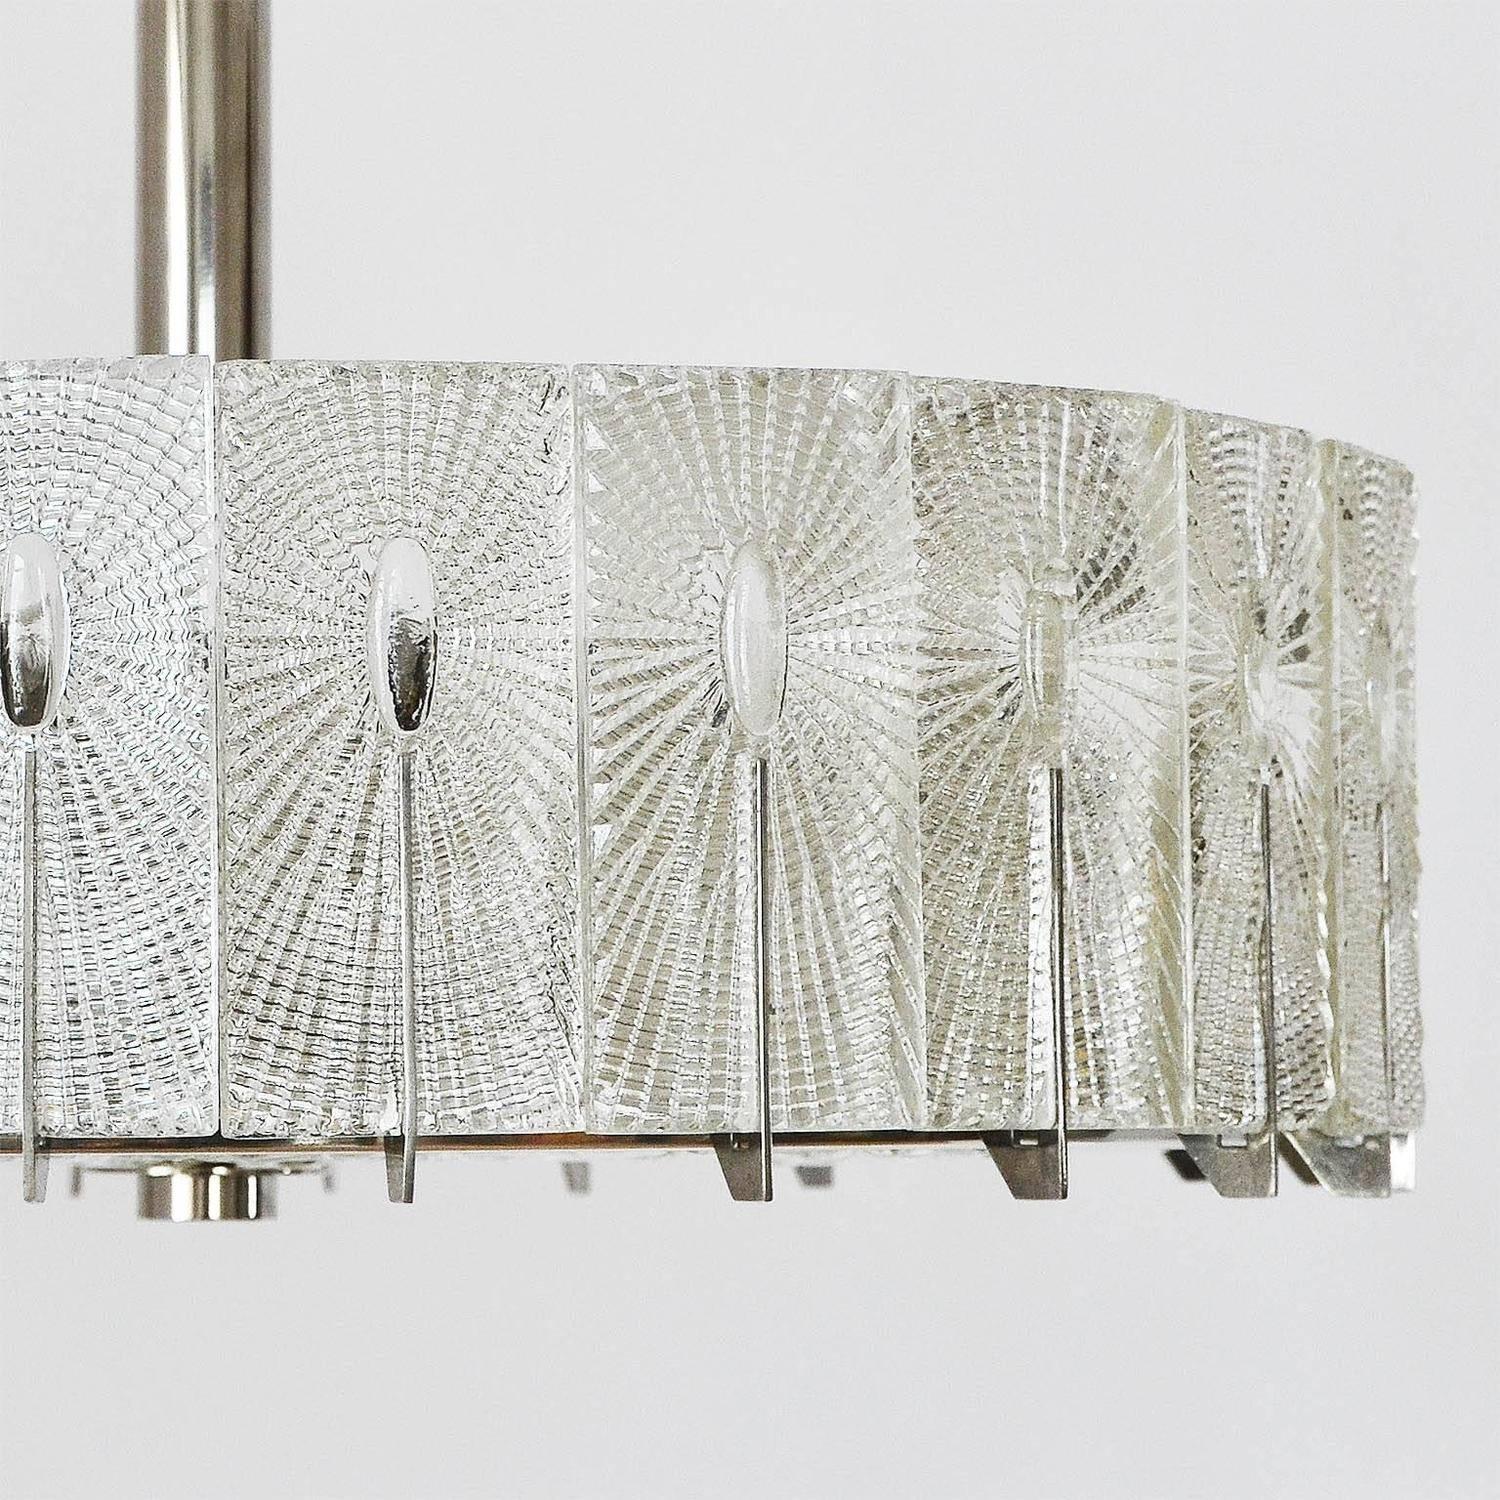 Mid-20th Century Chandelier by Rupert Nikoll, Textured Glass and Nickel, 1960